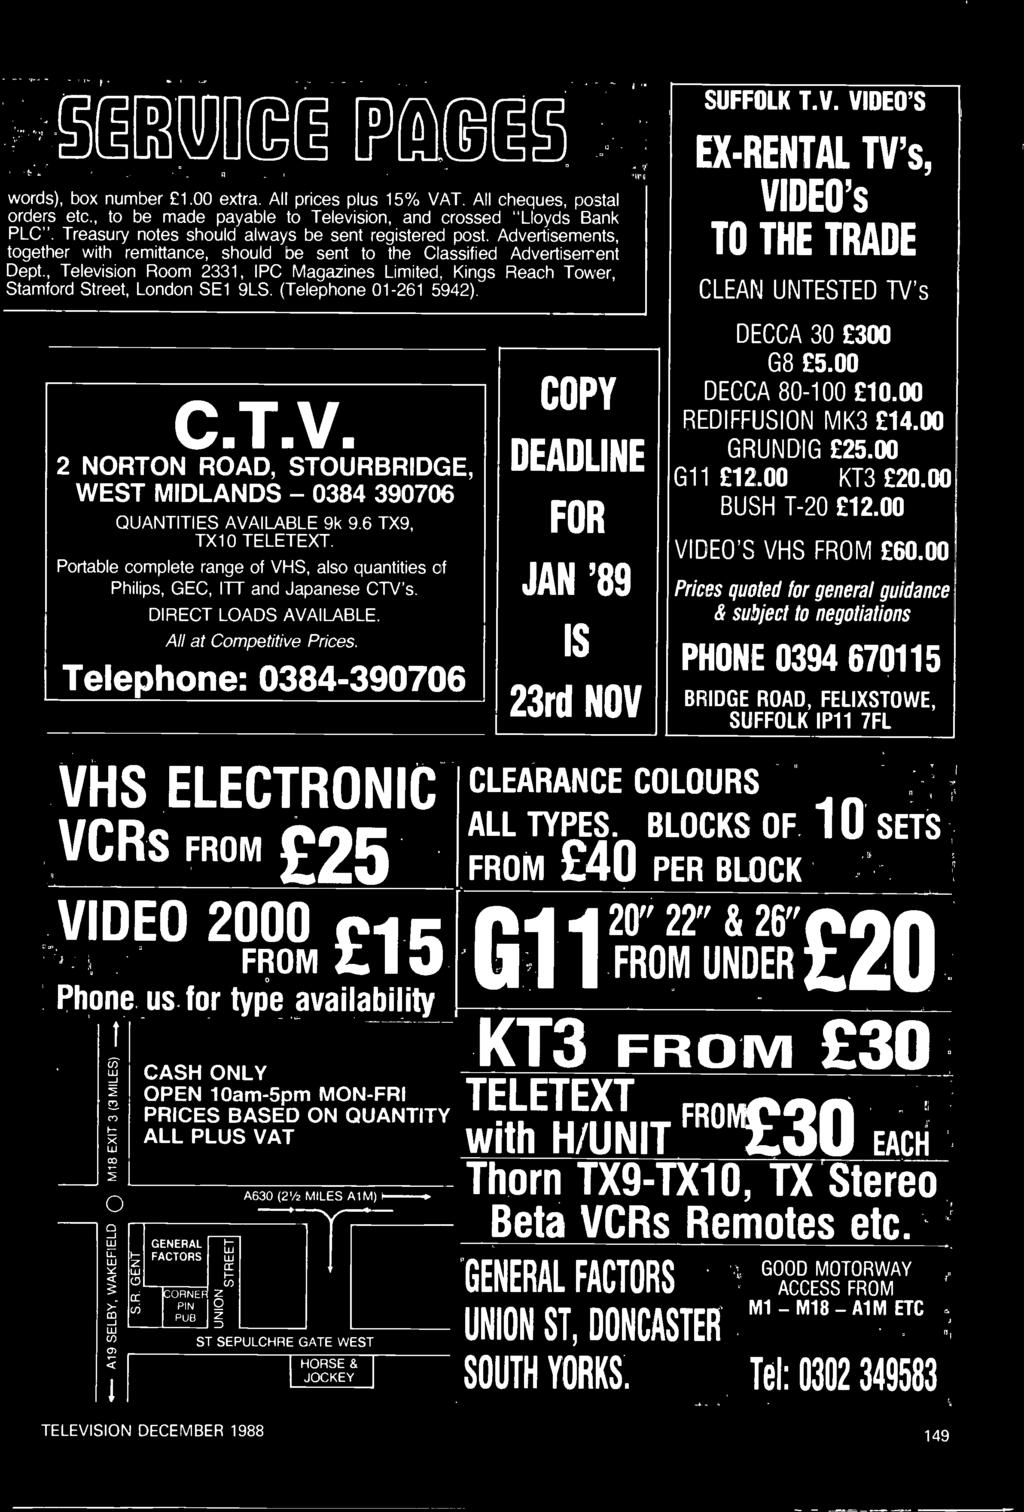 Portable complete range of VHS, also quantities of Philips, GEC, ITT and Japanese CTV's. DIRECT LOADS AVAILABLE. All at Competitive Prices.